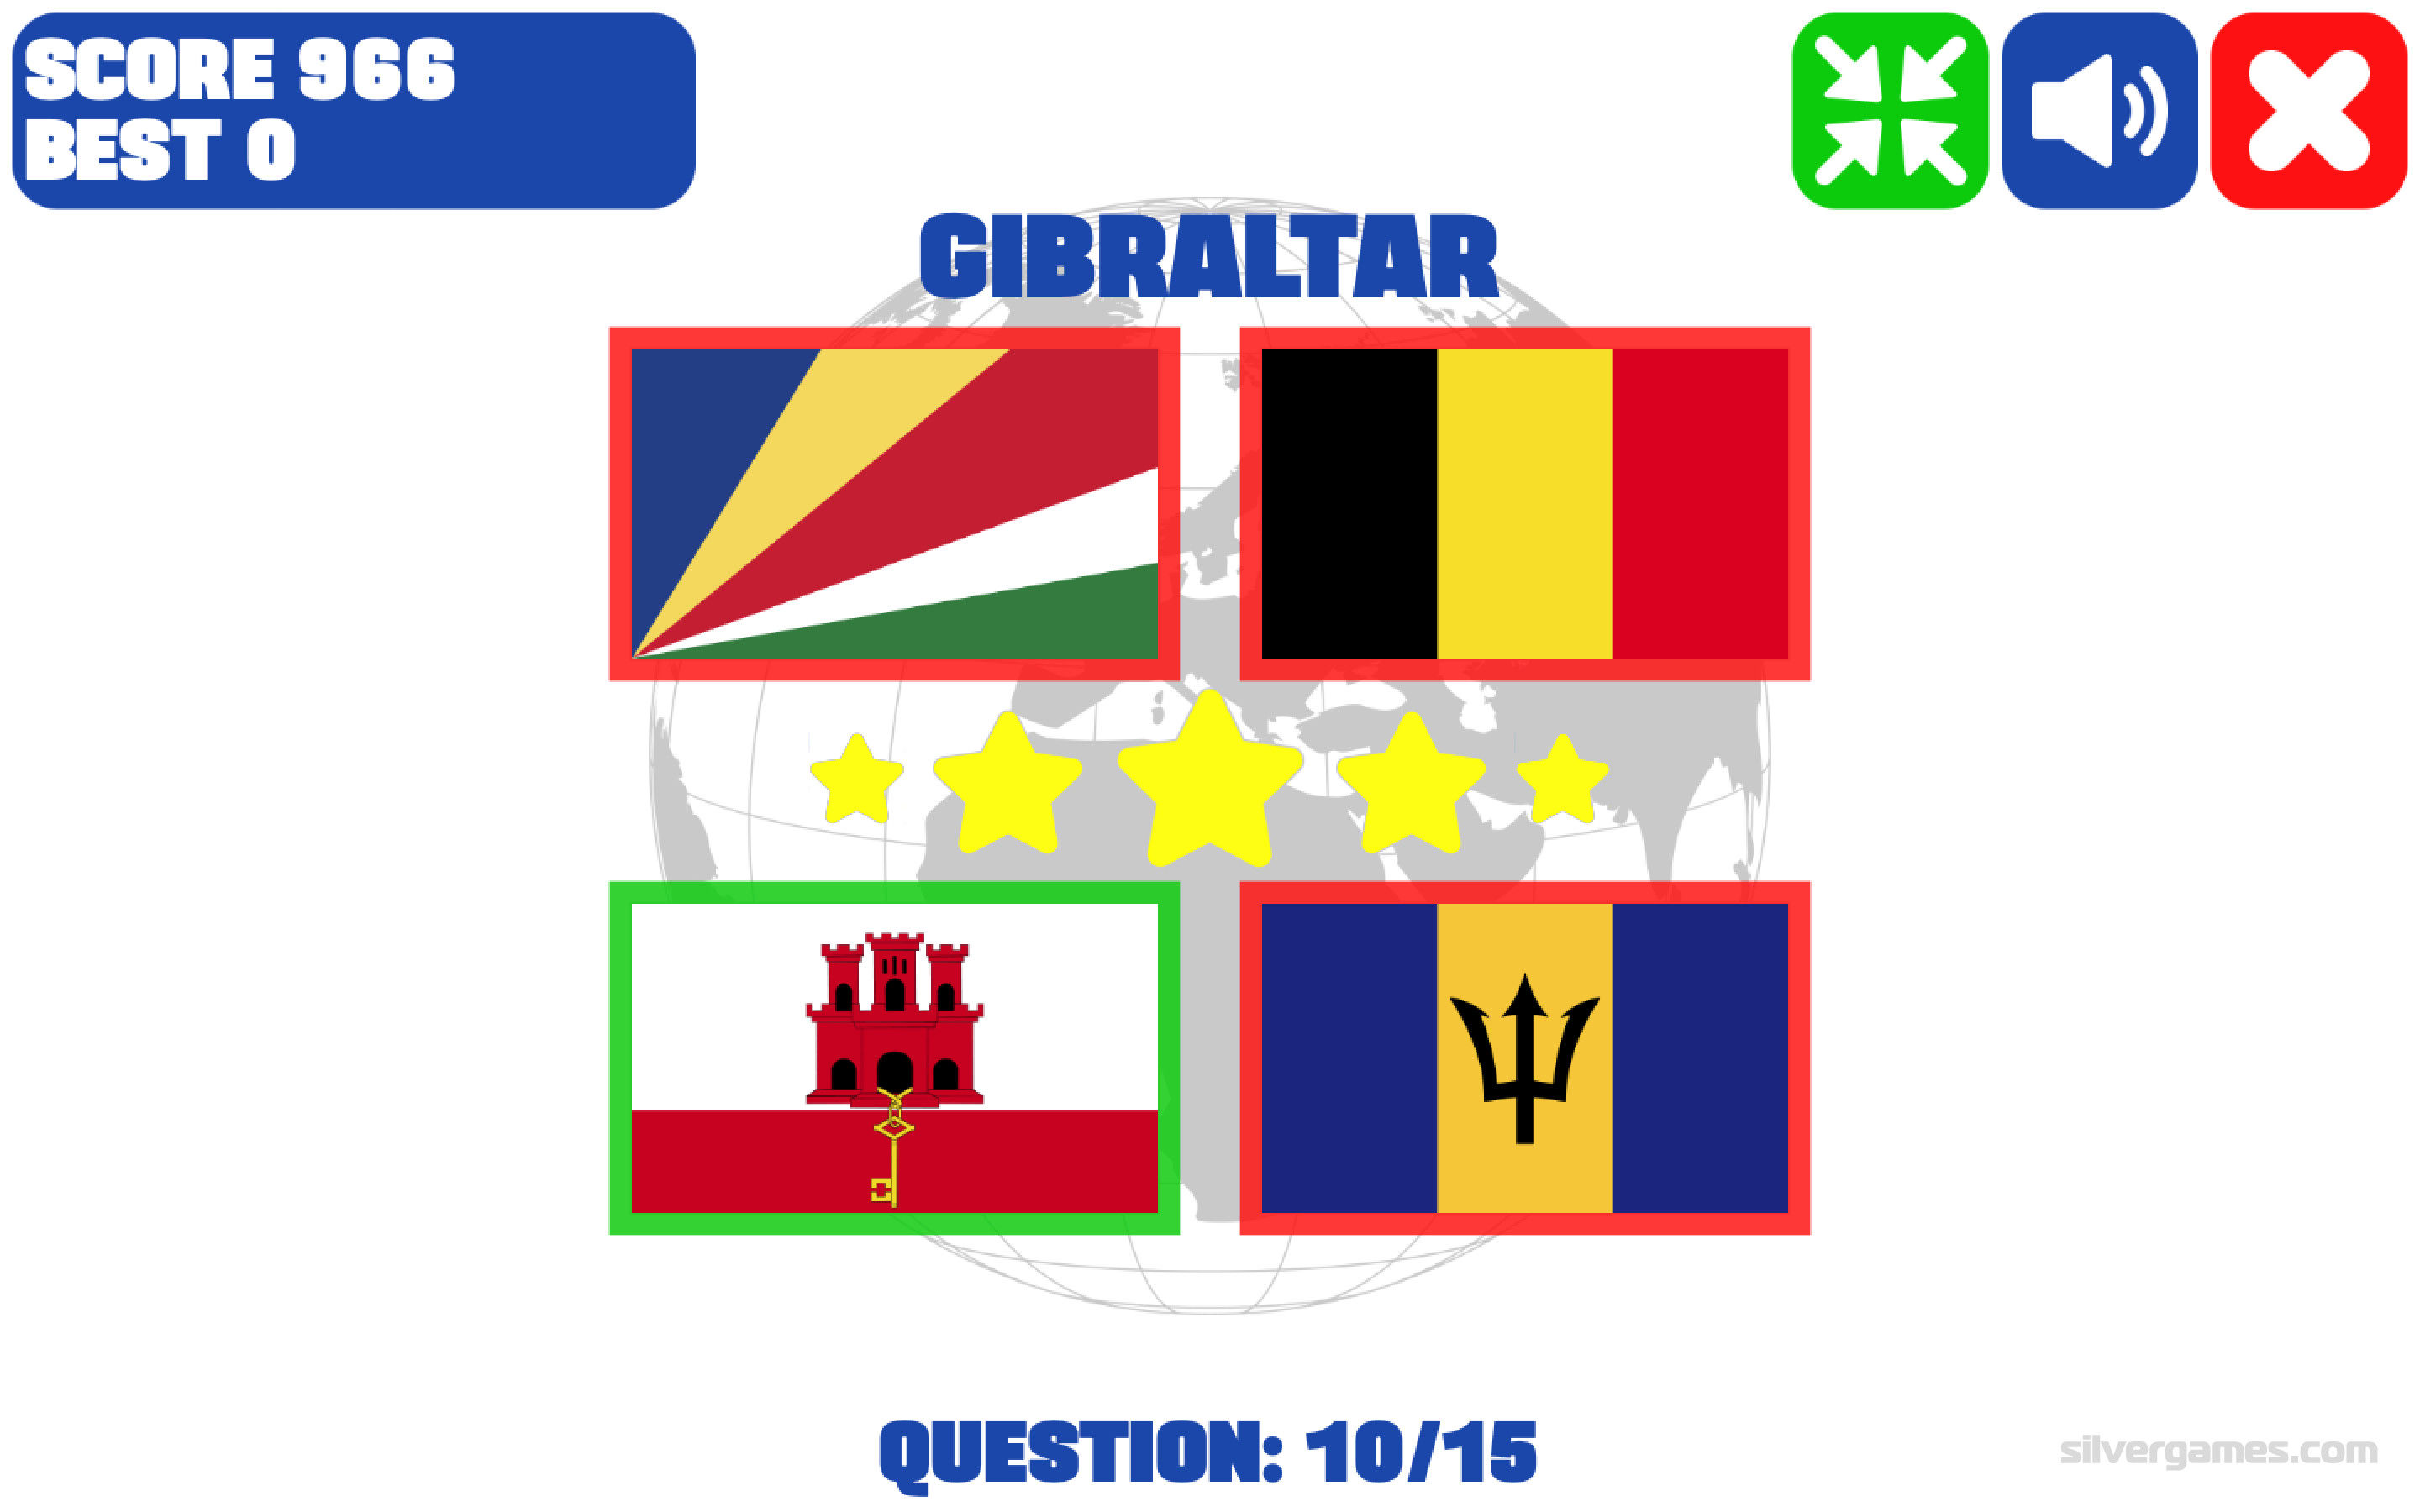 Guess The Flag: Quiz by Gaincode Ltd.